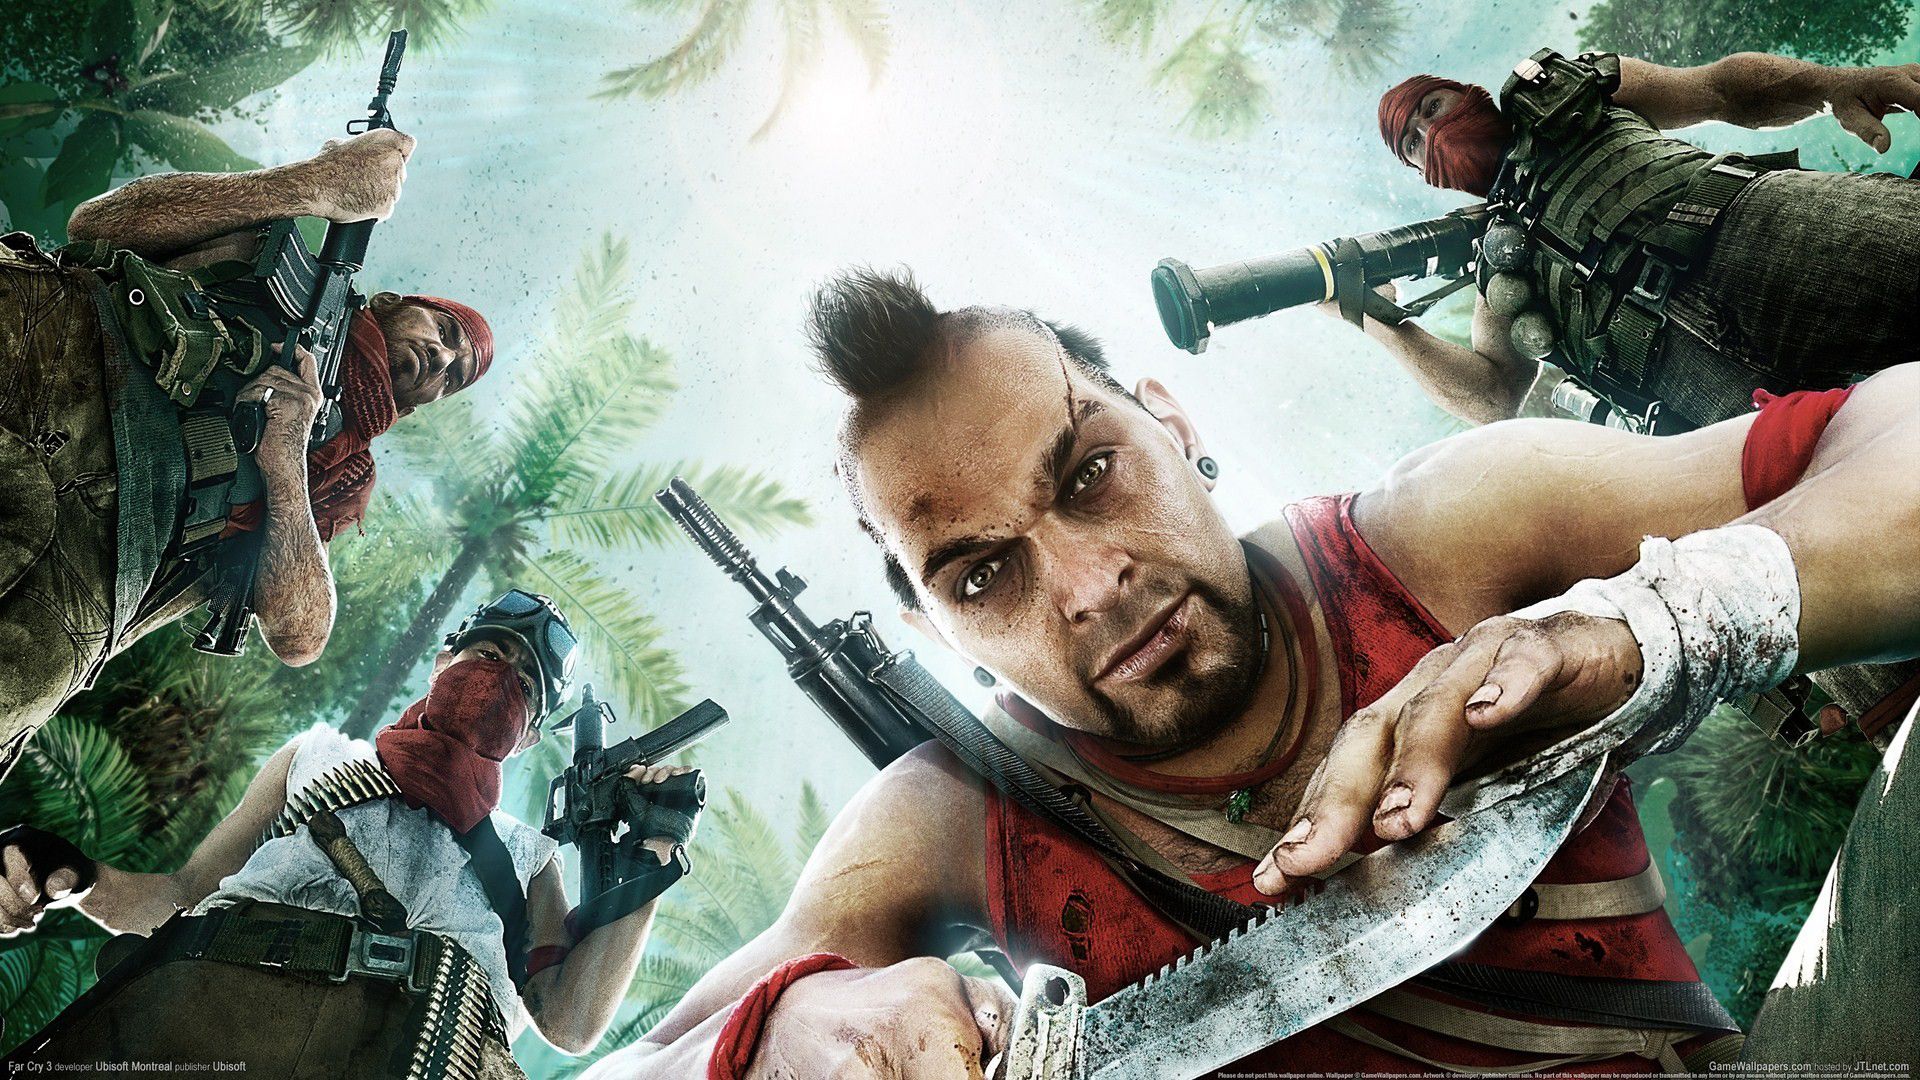 The voice of Far Cry 3's Vaas is eager to return to the role